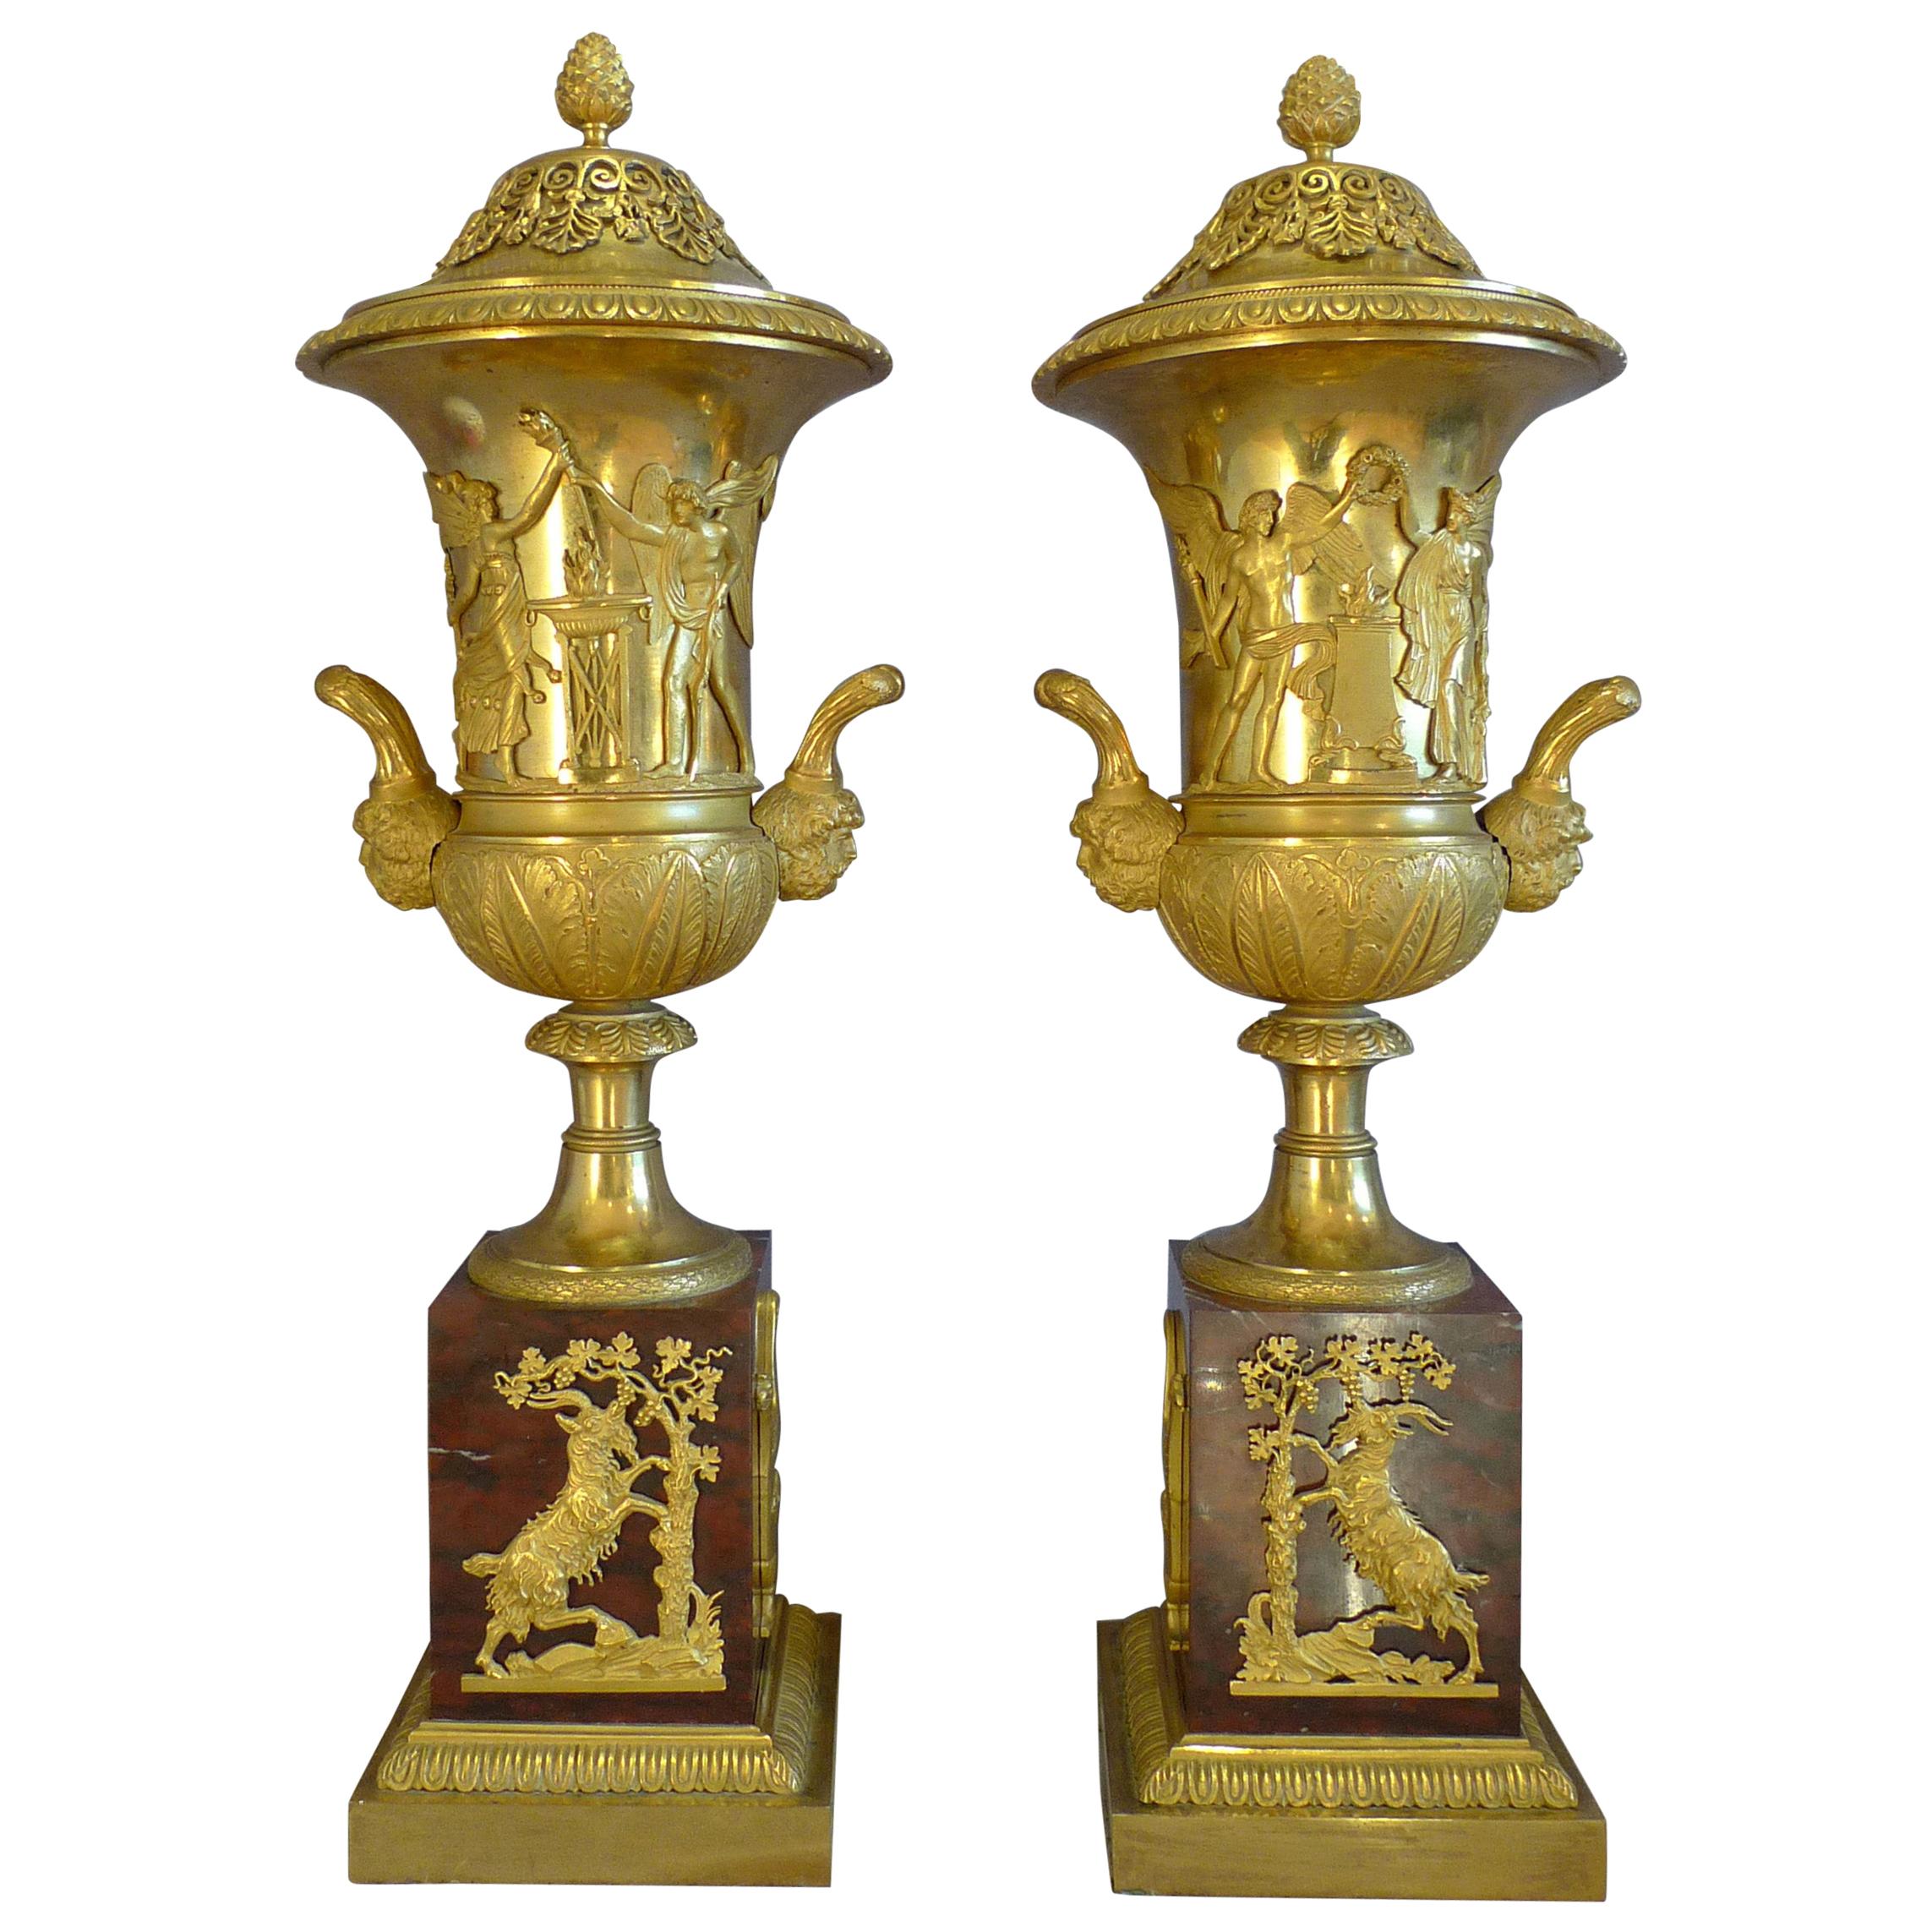 True Pair of Neoclassical Ormolu and Rouge Marble Covered Urns